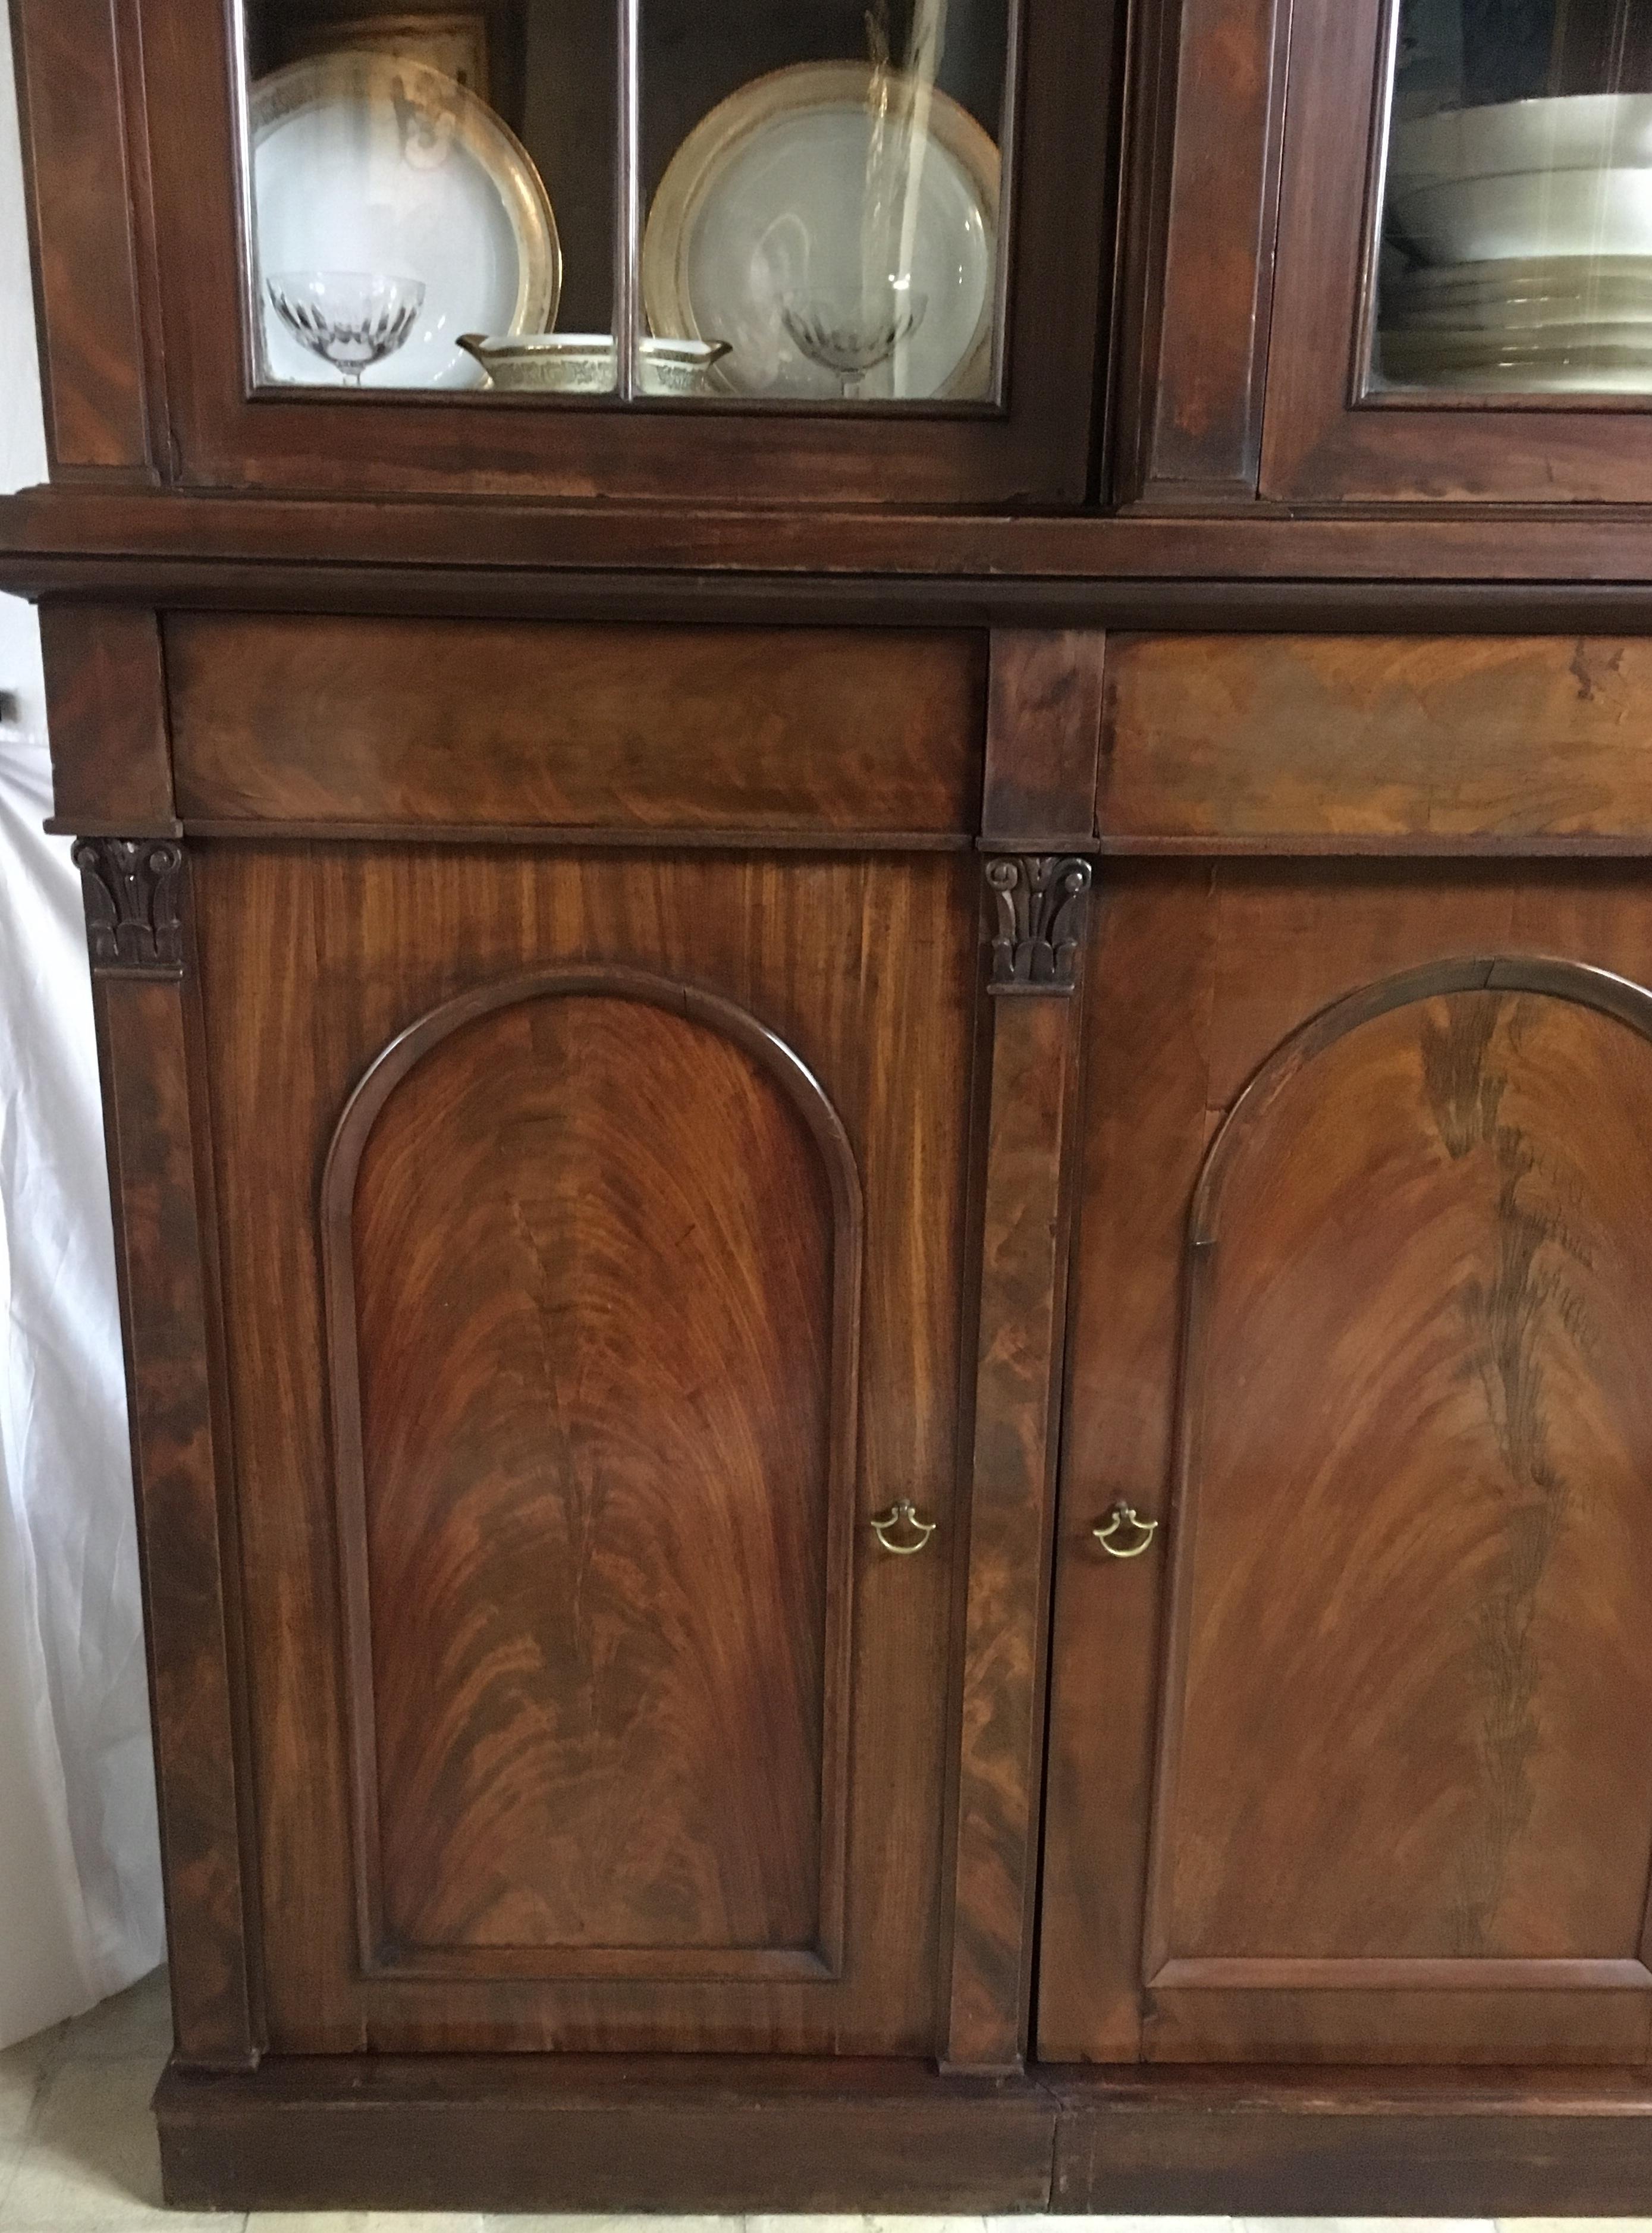 This is a beautiful antique early Victorian flame mahogany eight-door breakfront bookcase, cupboard, wardrobe or storage cabinet masterfully crafted in high quality flame mahogany wood, circa 1860.

This beautiful piece features four arched top